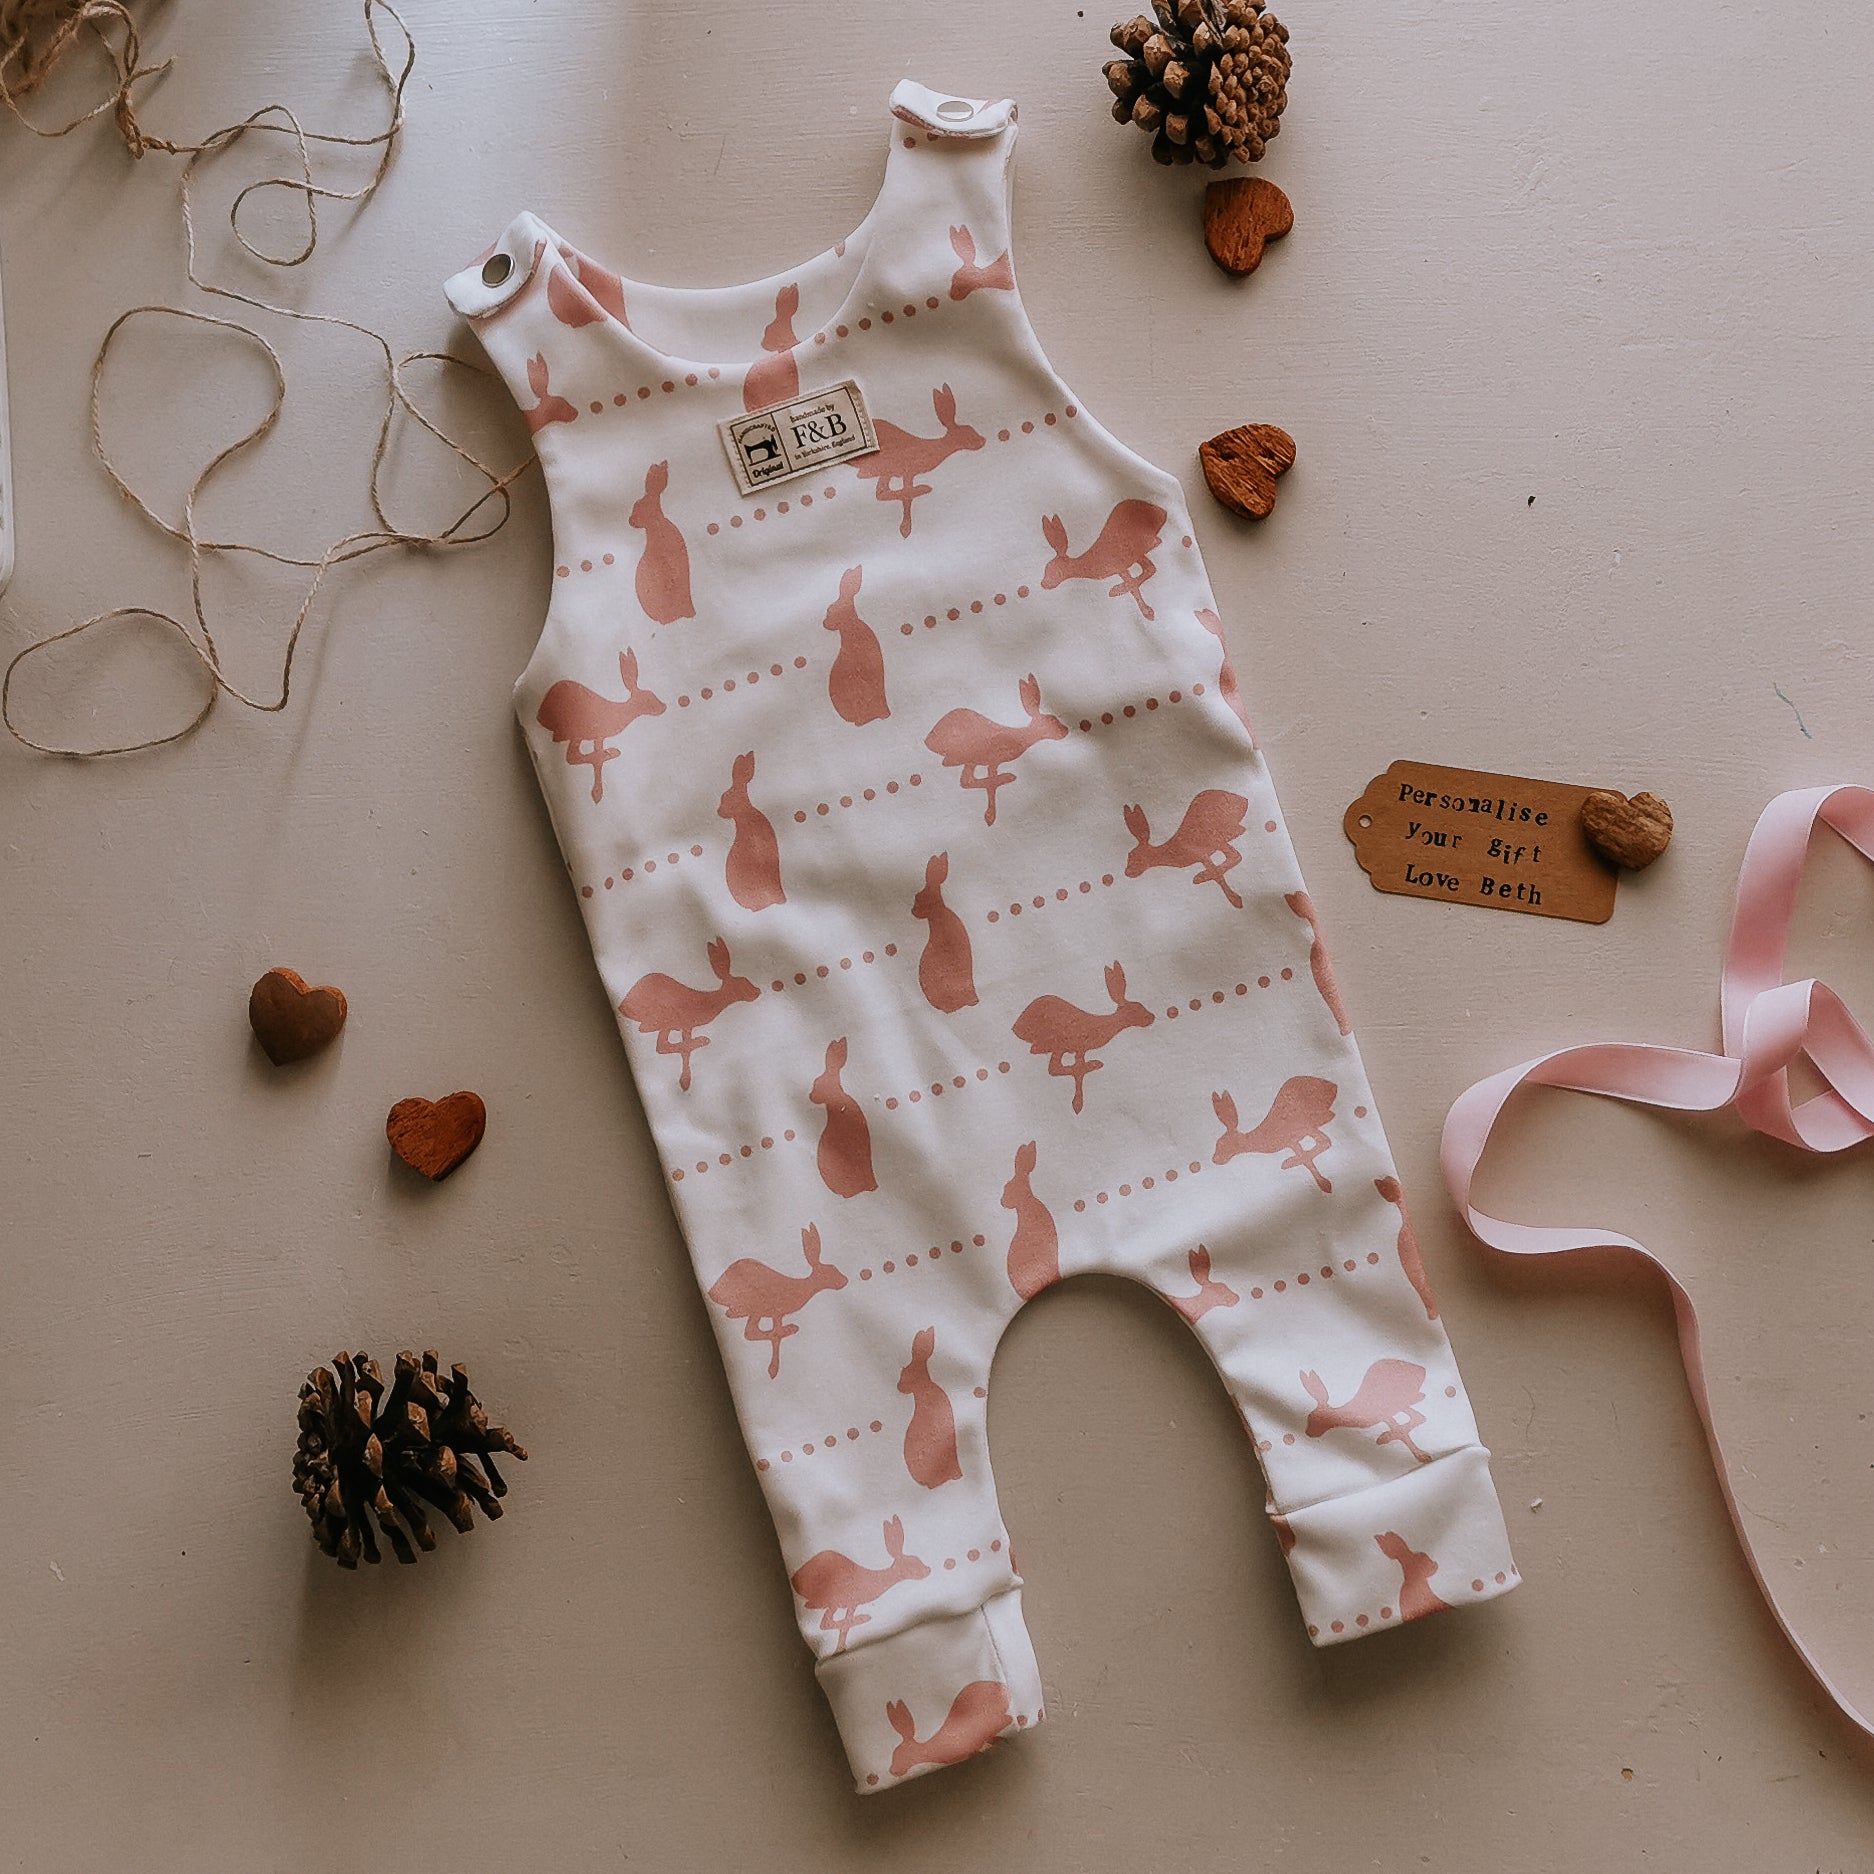 F&B childrens country clothing - baby romper in organic fabric featuring hares and dots